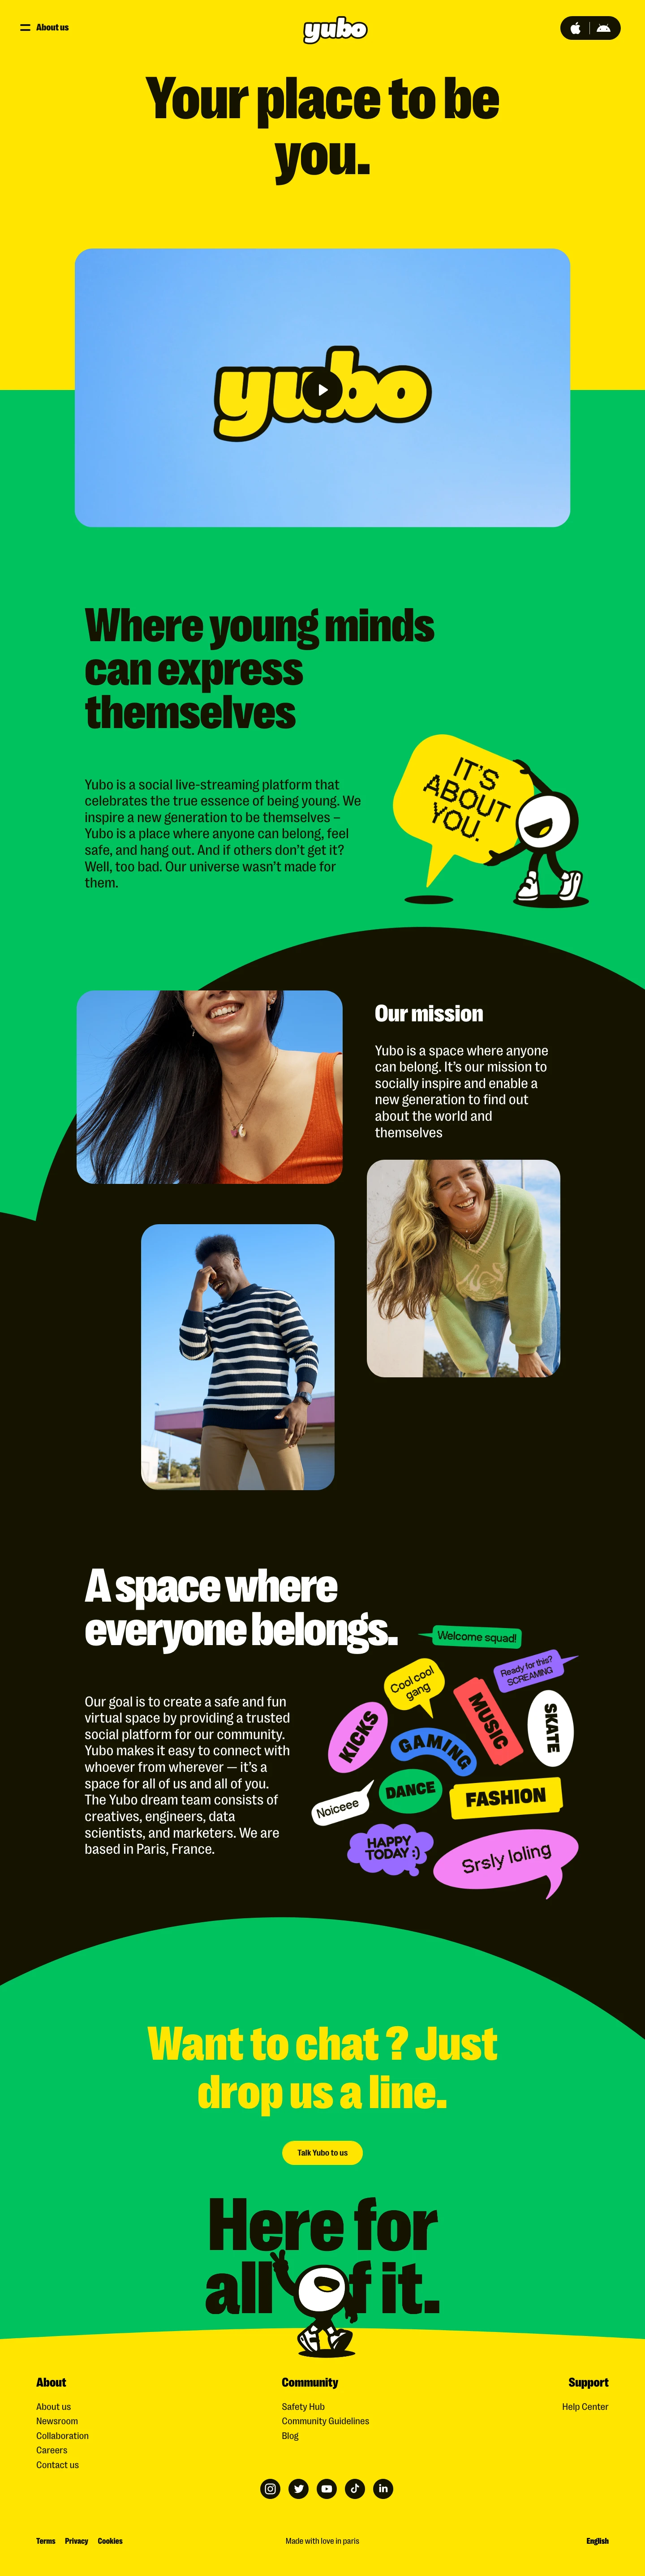 Yubo Landing Page Example: Yubo is your social video live-streaming app. Join the fun, chat, play games, and live stream. There’s always a place for you here. Ready to Yubo?